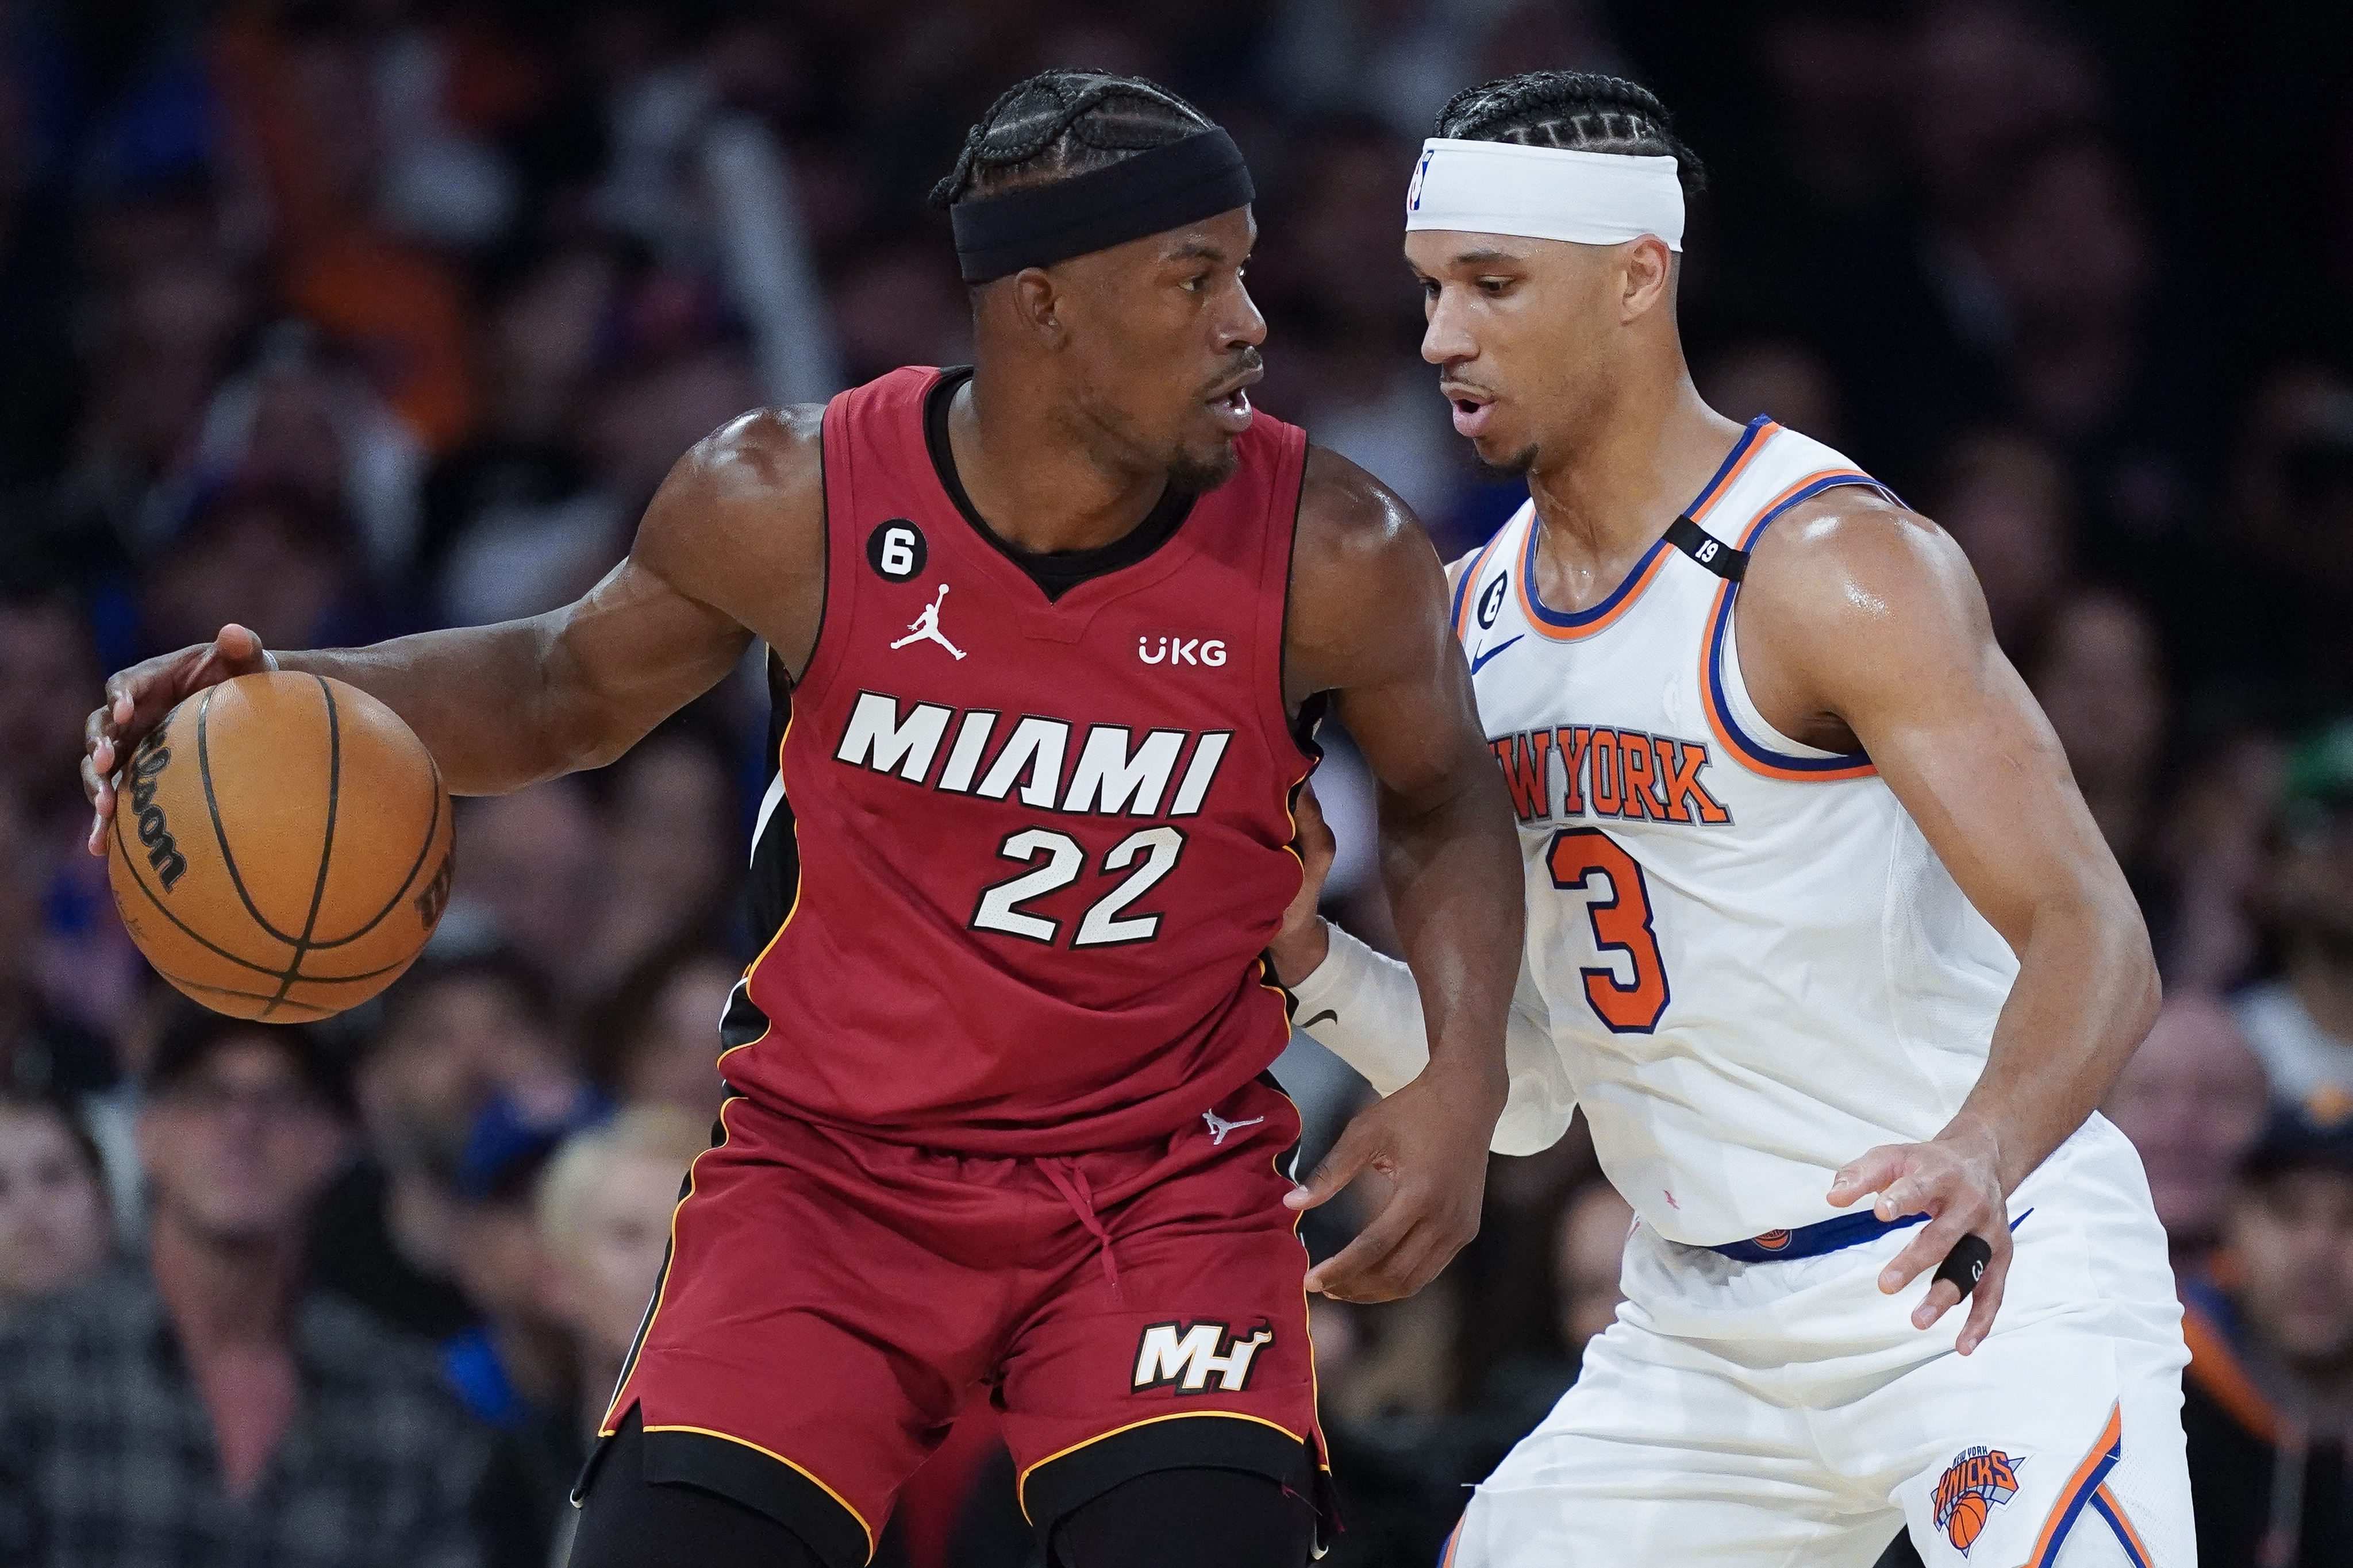 NBA playoffs: How to watch the Miami Heat at New York Knicks Sunday